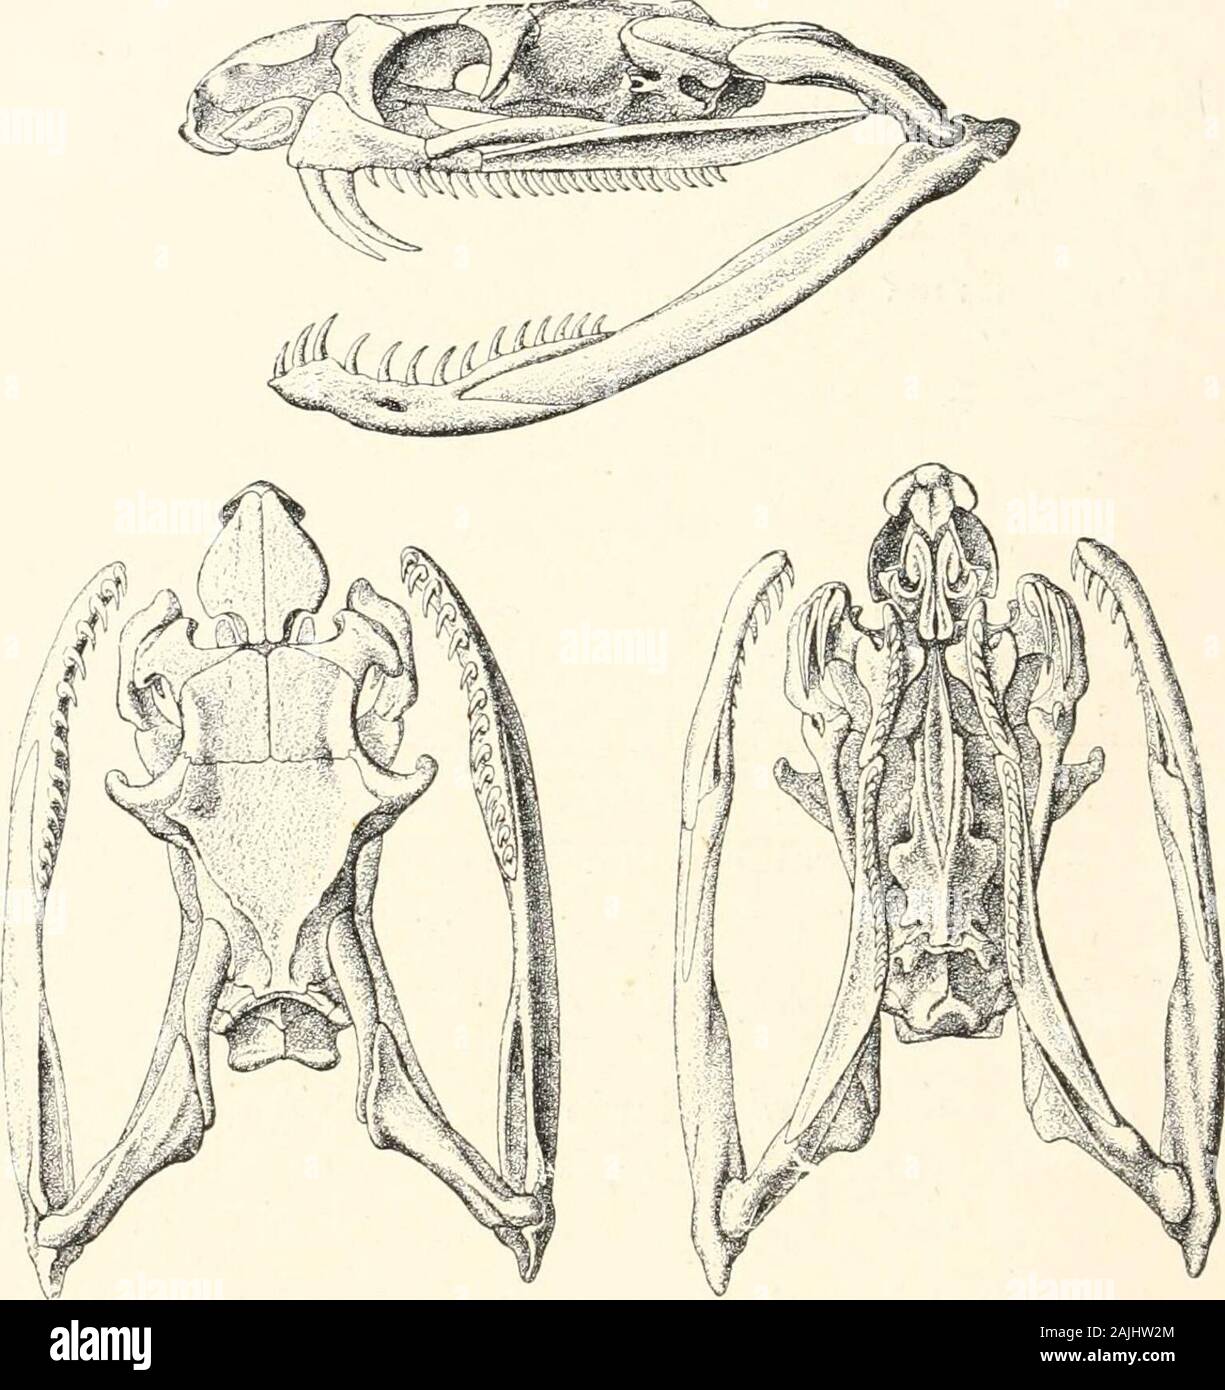 Venoms; venomous animals and antivenomous serum-therapeutics . a conical and pointed tail. Scales smooth, disposed obliquely, in15—25 rows. Ventral scales round. N. tyipudians (Cobra-di-CajJeUo). (Fig. 26.) Head small, covered with large shields, a frontal as long asbroad, a supraocular, a praeocular, 3 postoculars, 2 -f- 3 or 3 -|- 3temporals, 7 upper labials, 4 lower labials. Neck dilatable by theseparation of the first cervical ribs; 21—35 scales round the neck,17—25 round the middle of the body : 163—205 ventrals; 42—75subcaudals. Total length, 1,500—1,900 millimetres; tail 230. Coloration Stock Photo